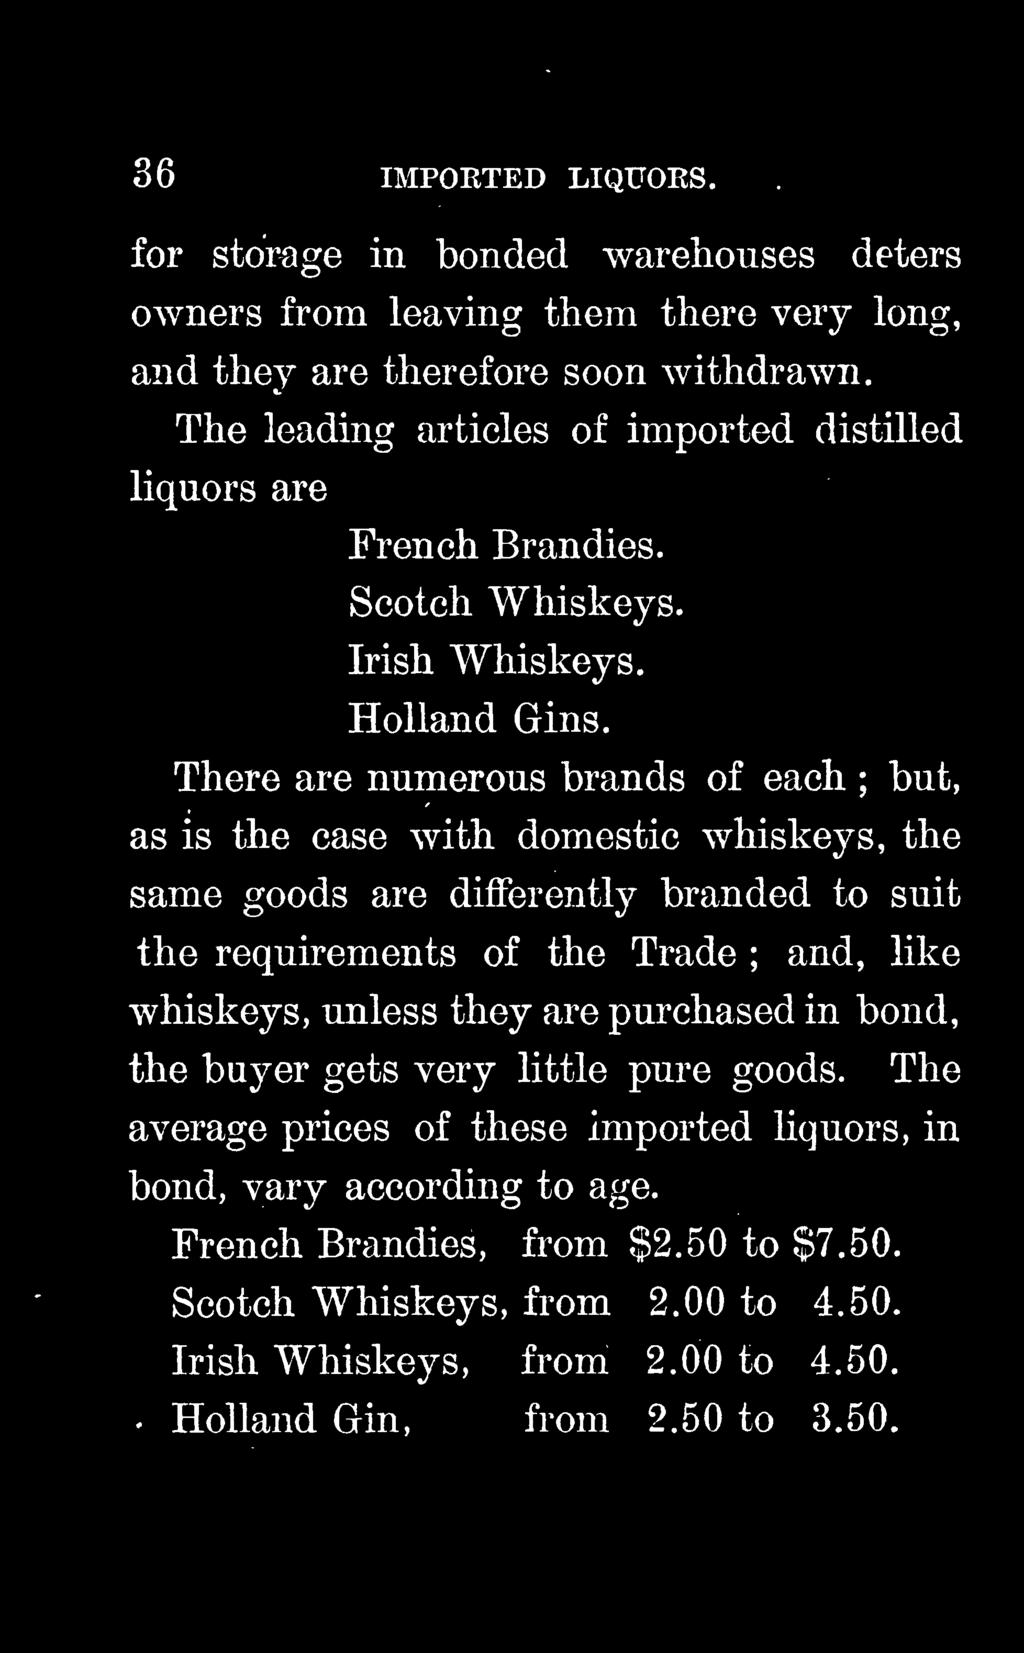 the requirements of the Trade ; and, like whiskeys, unless they are purchased in bond, the buyer gets very little pure